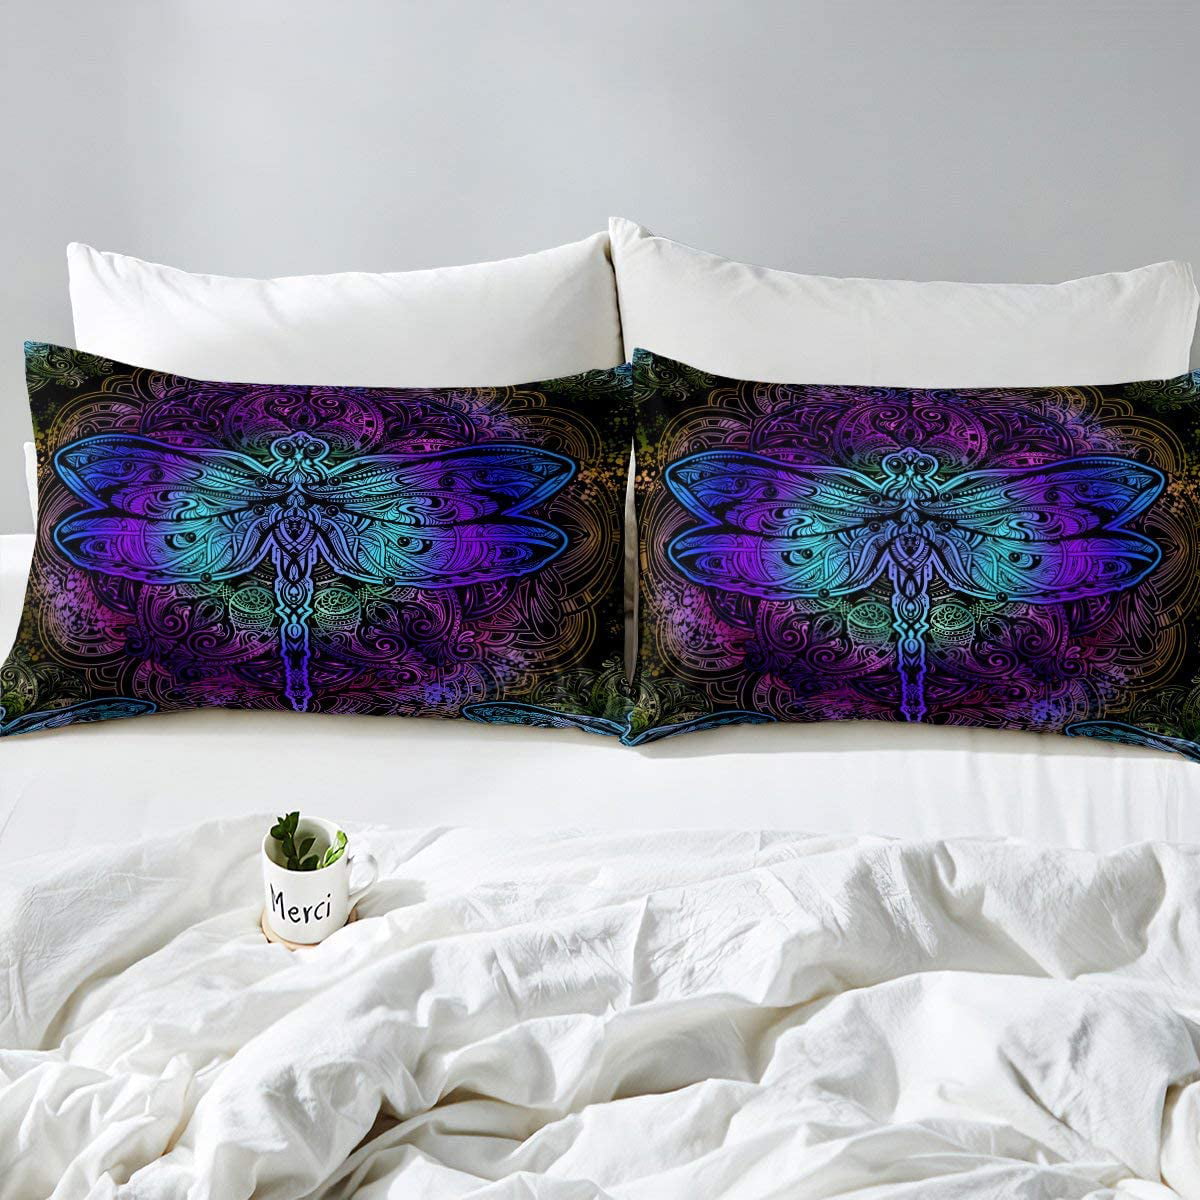 WEIS Bohemian Dragonfly Comforter Cover King Size Mandala Paisley Bedding  Set Purple Dragonfly Duvet Cover Tie Dye Trippy Gypsy Iridescent Chic  Hippie 